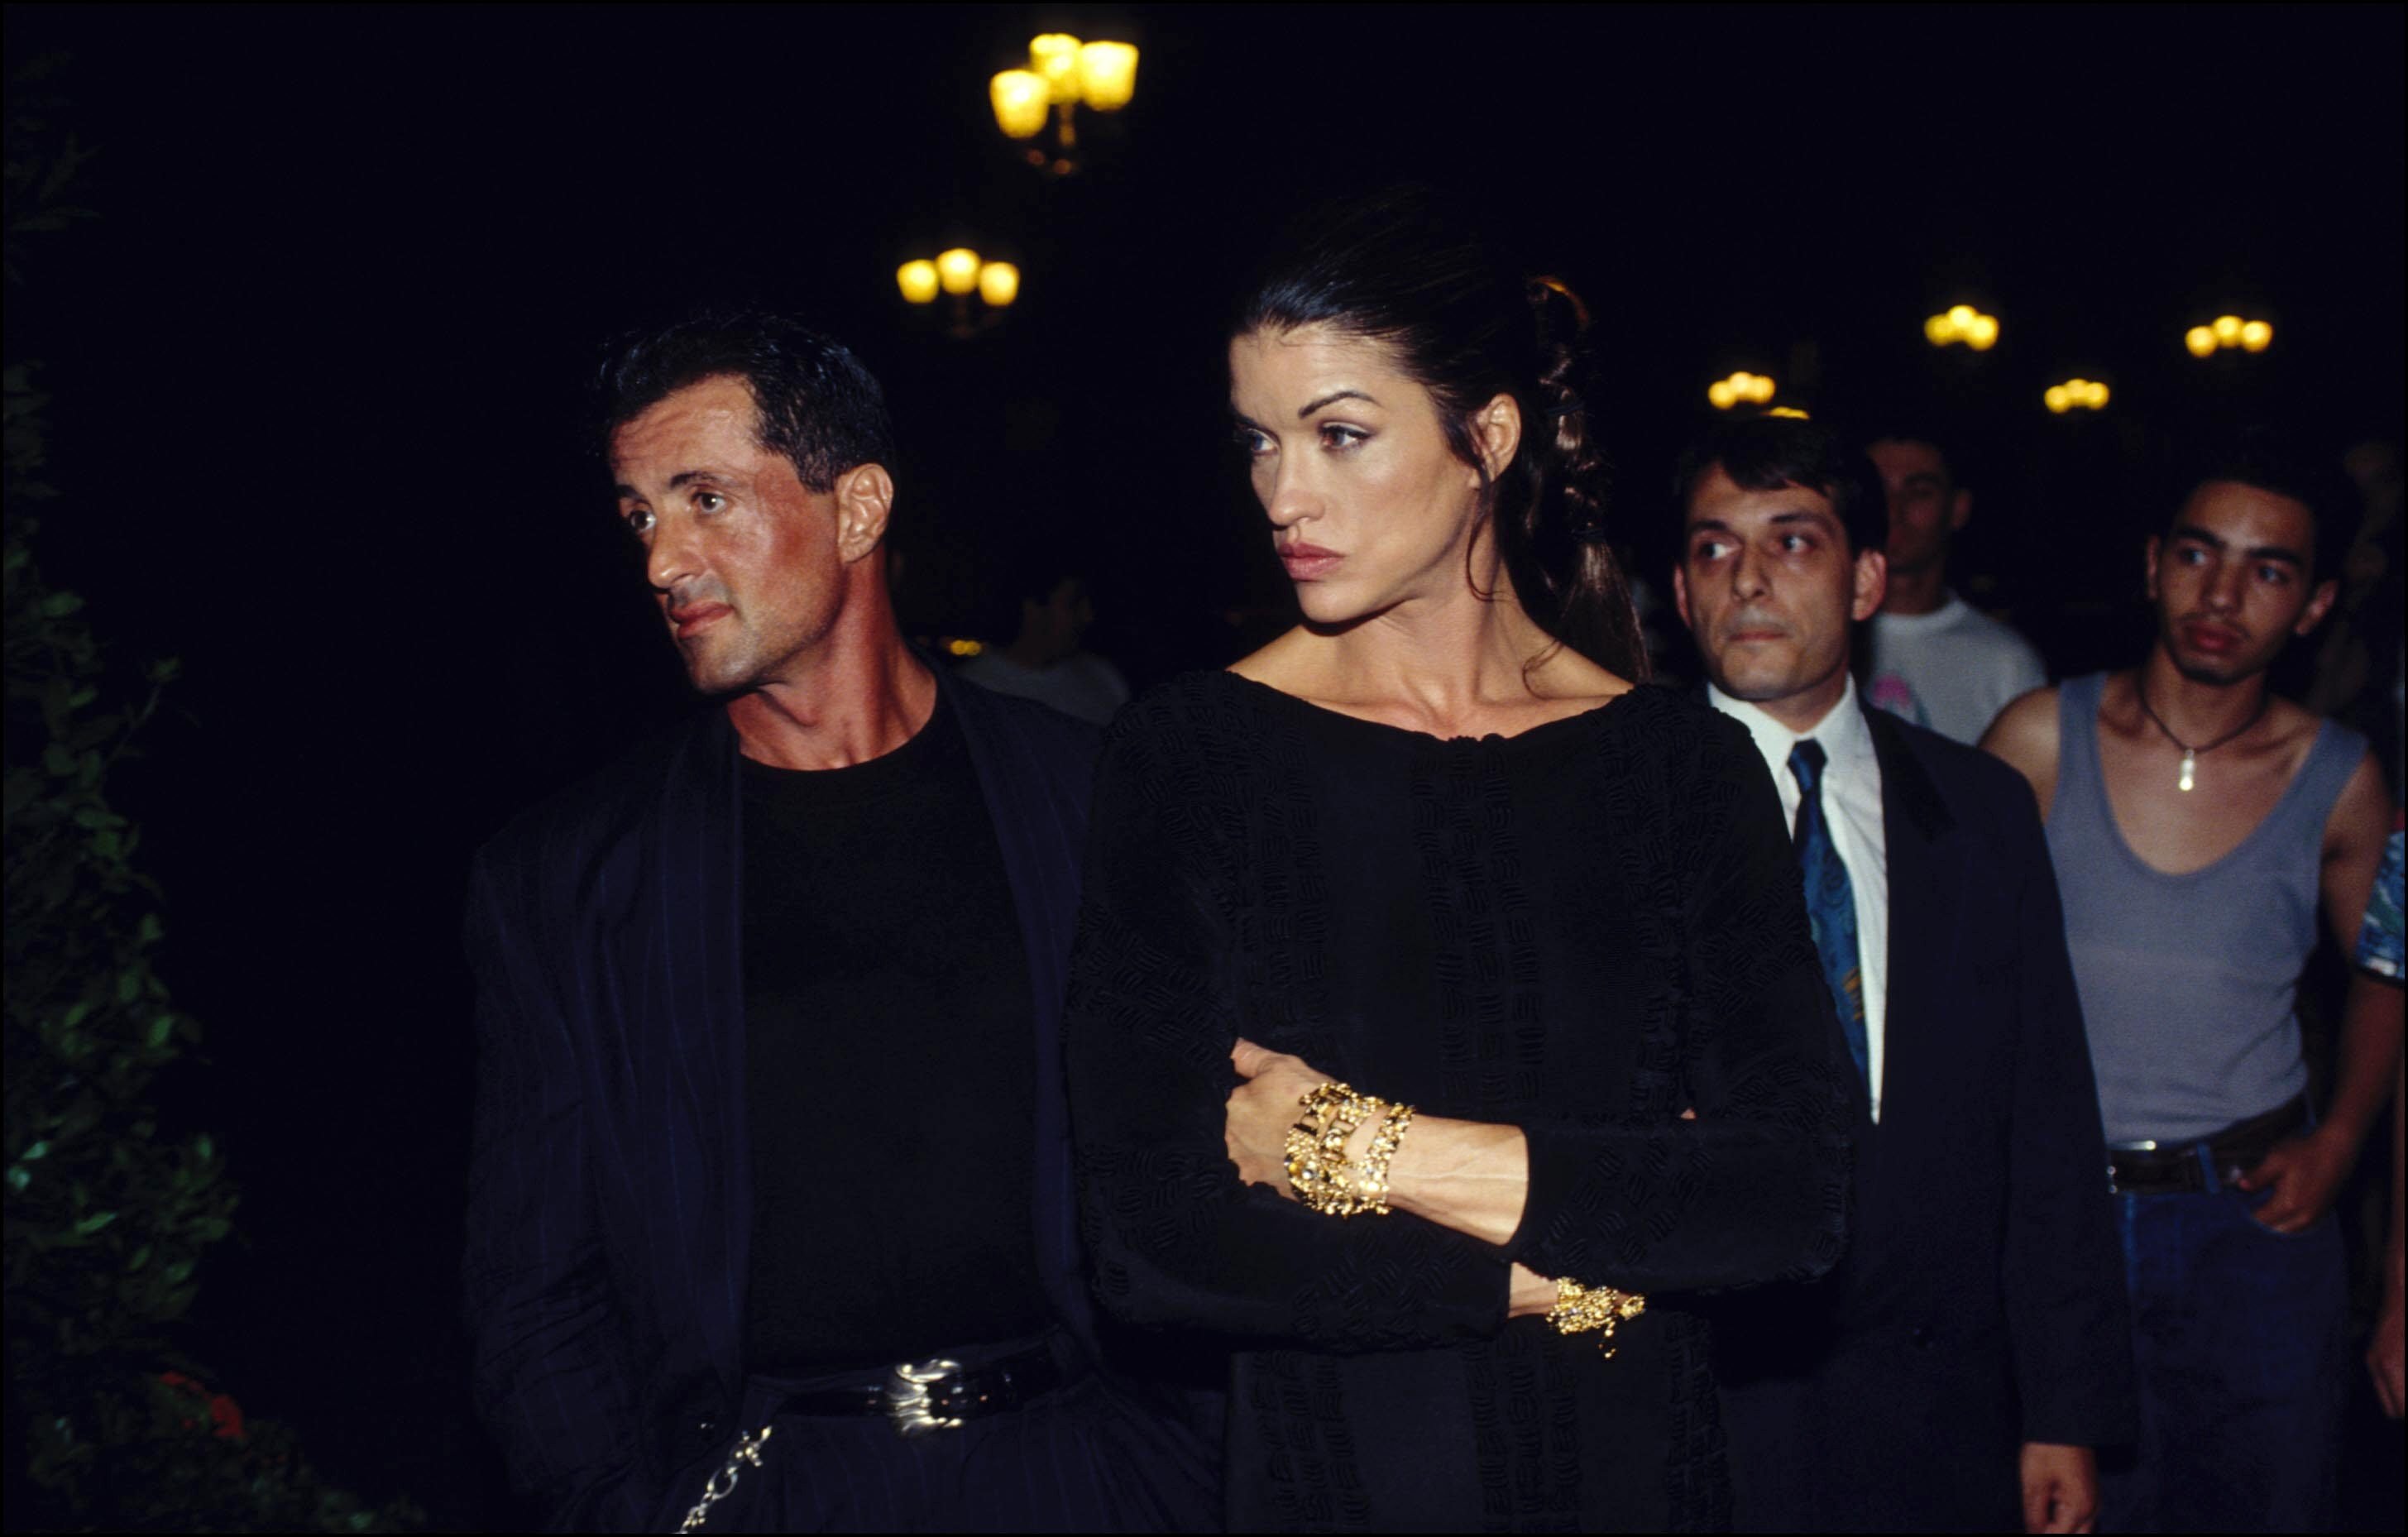 Actor Sylvester Stallone at the Gianni Versace Fashion Show People On July 17, 1994 | Source: Getty Images